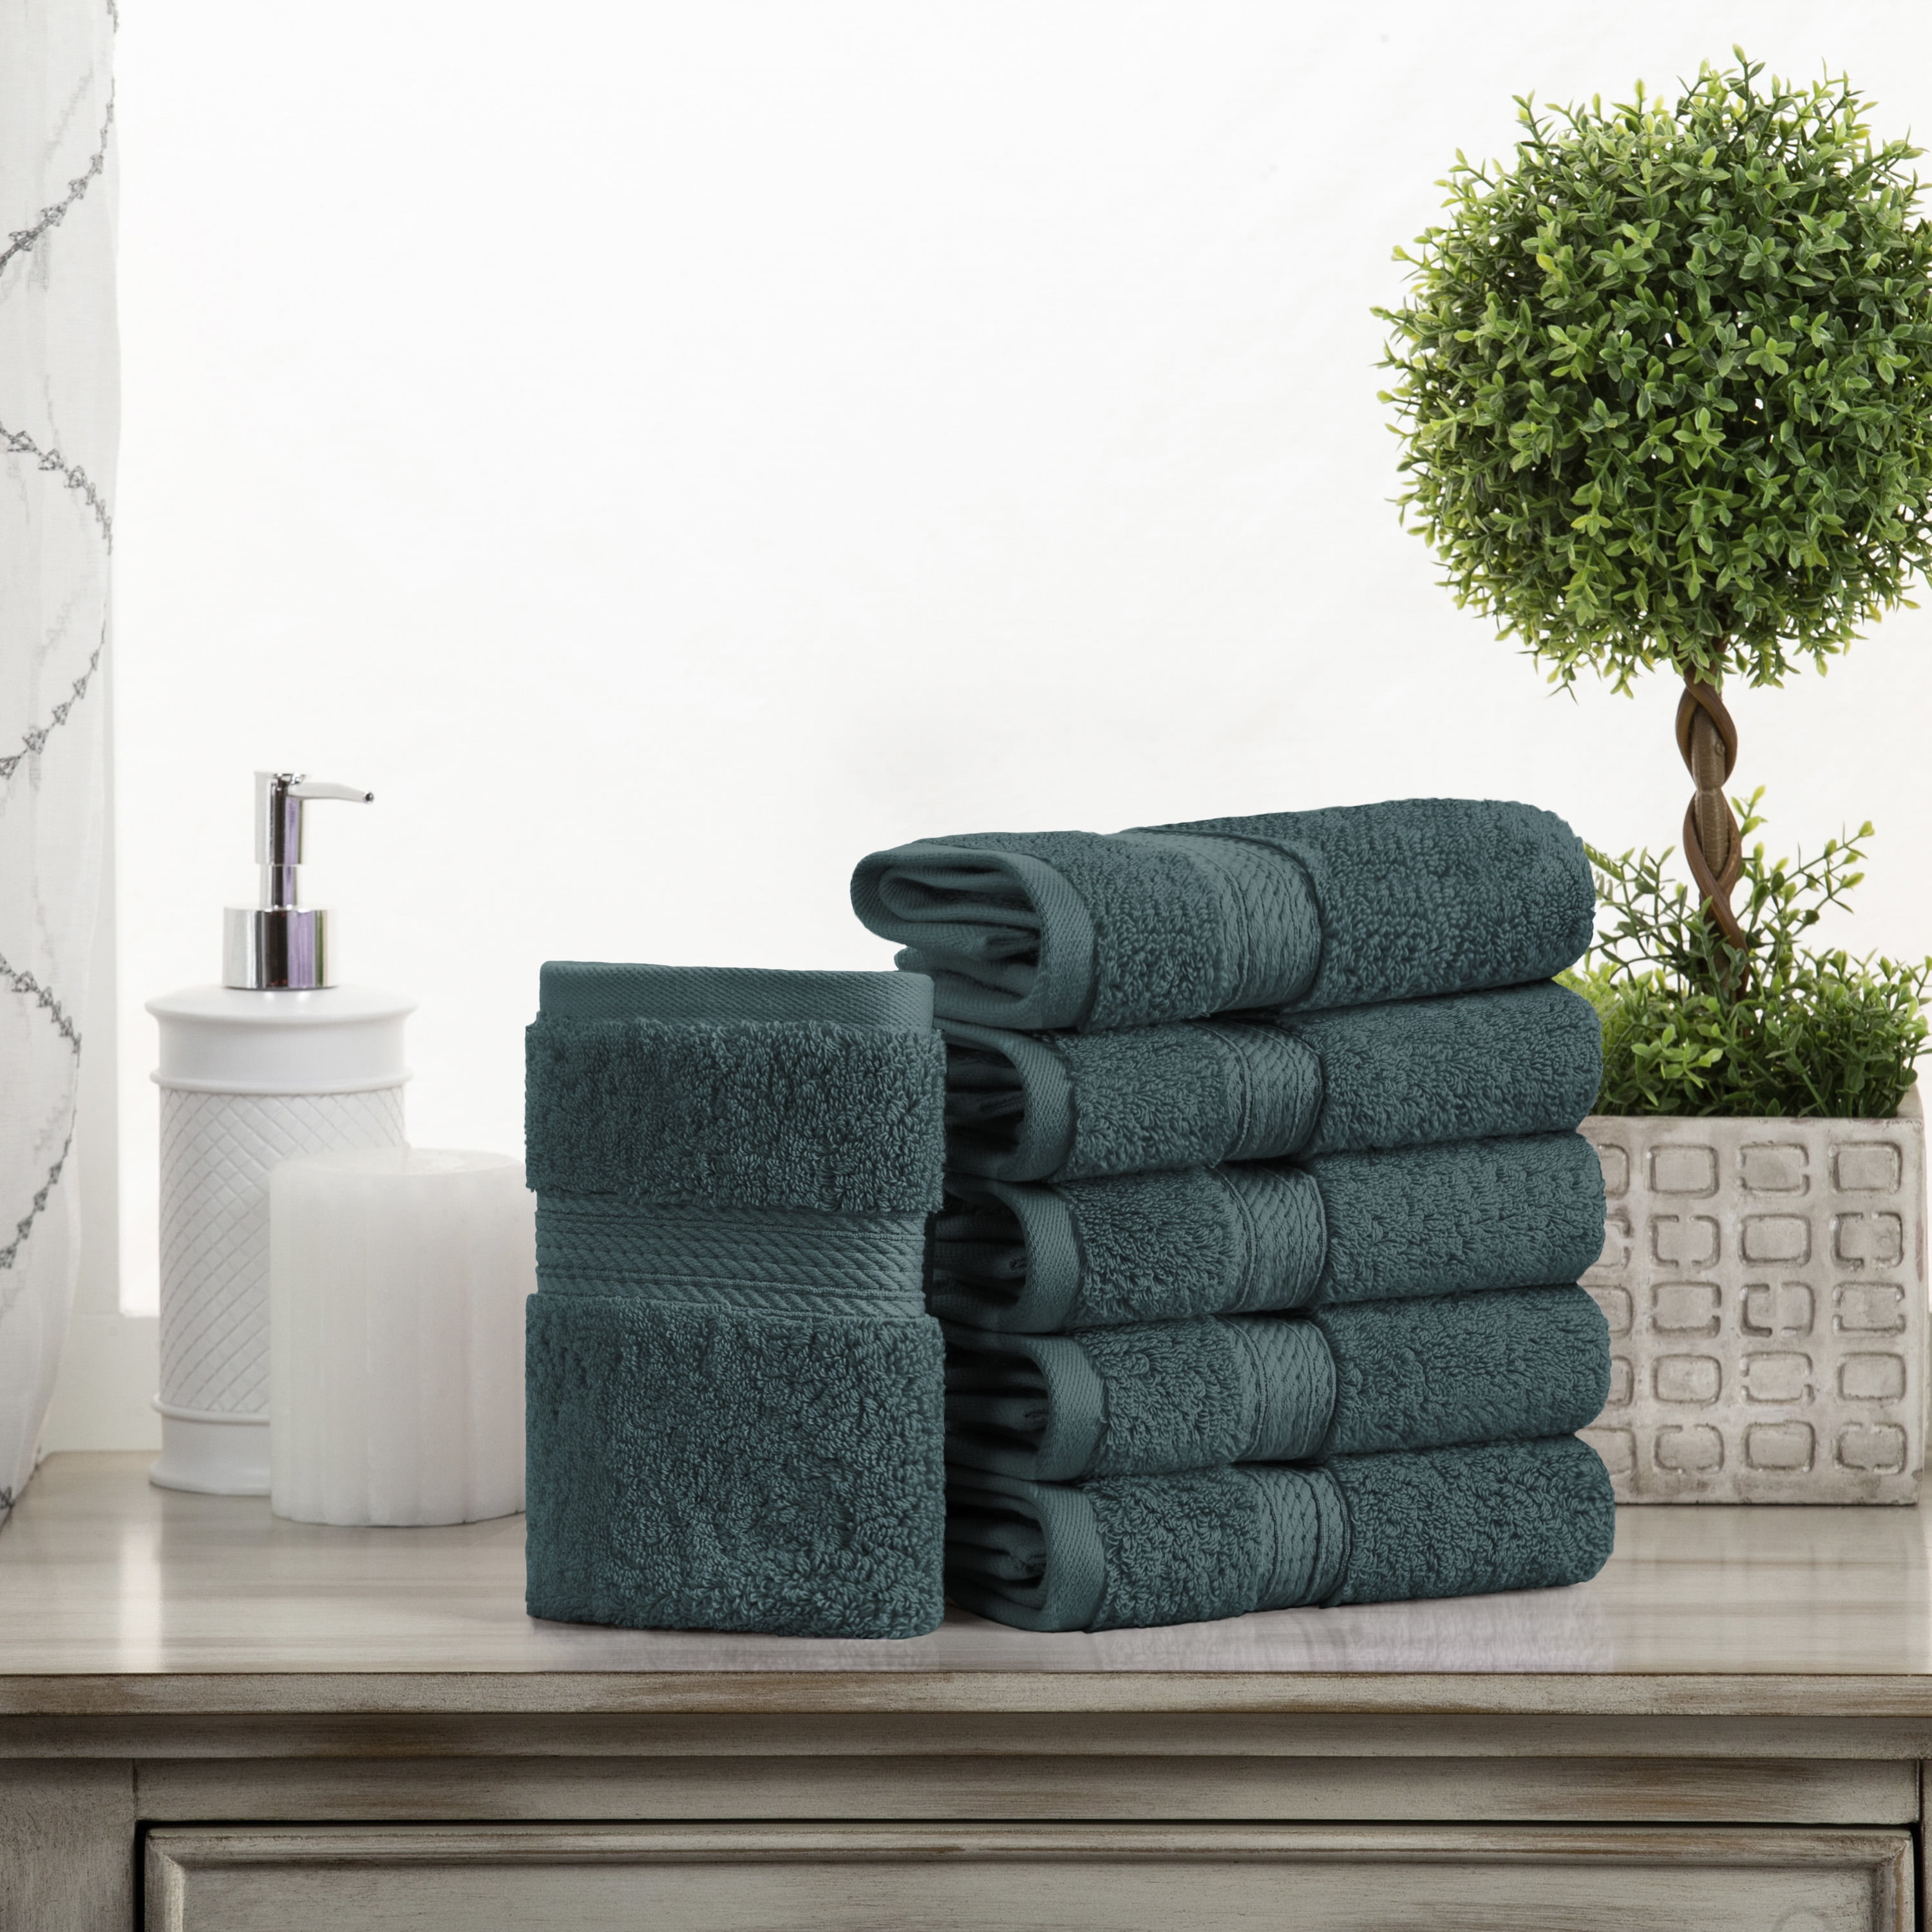 Oversized Plush & Absorbent Towels Details about   900 GSM Egyptian Cotton Hand Towel Set of 4 